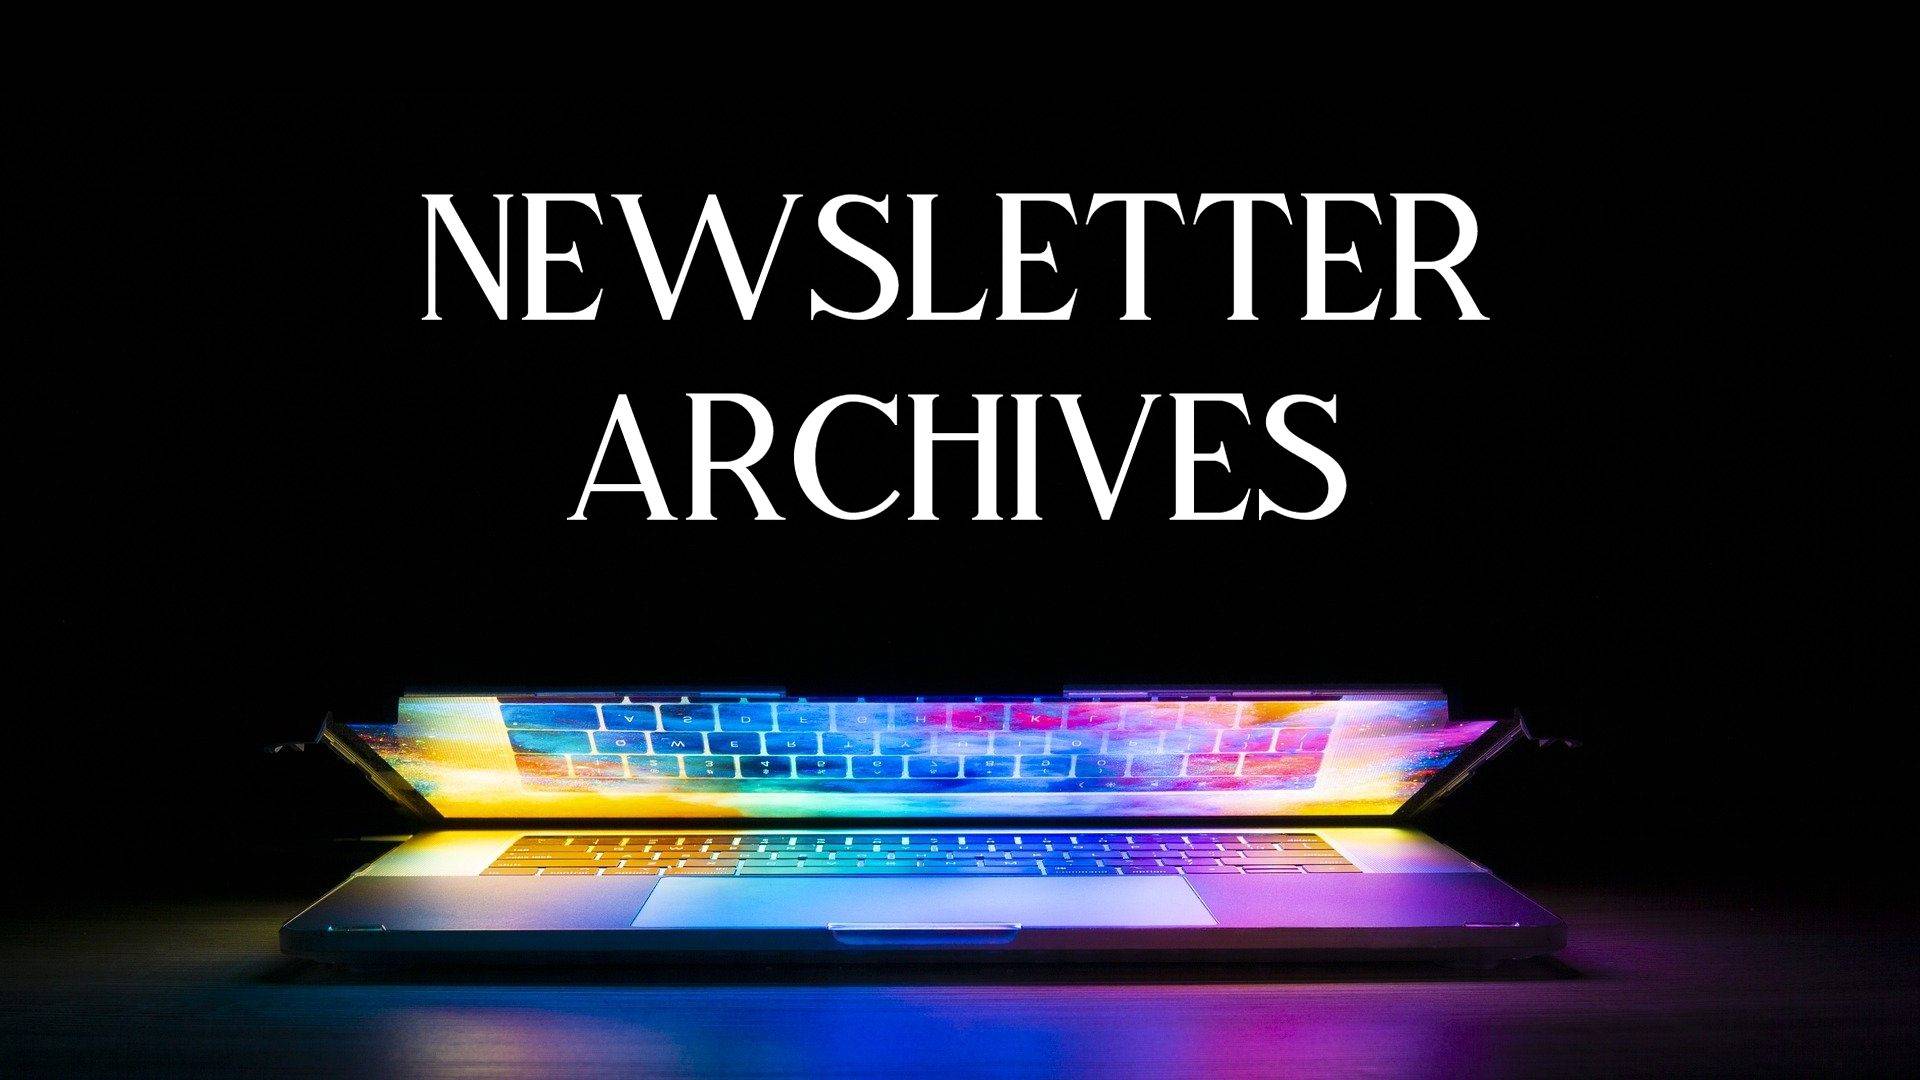 Newsletter Archives with computer partially open